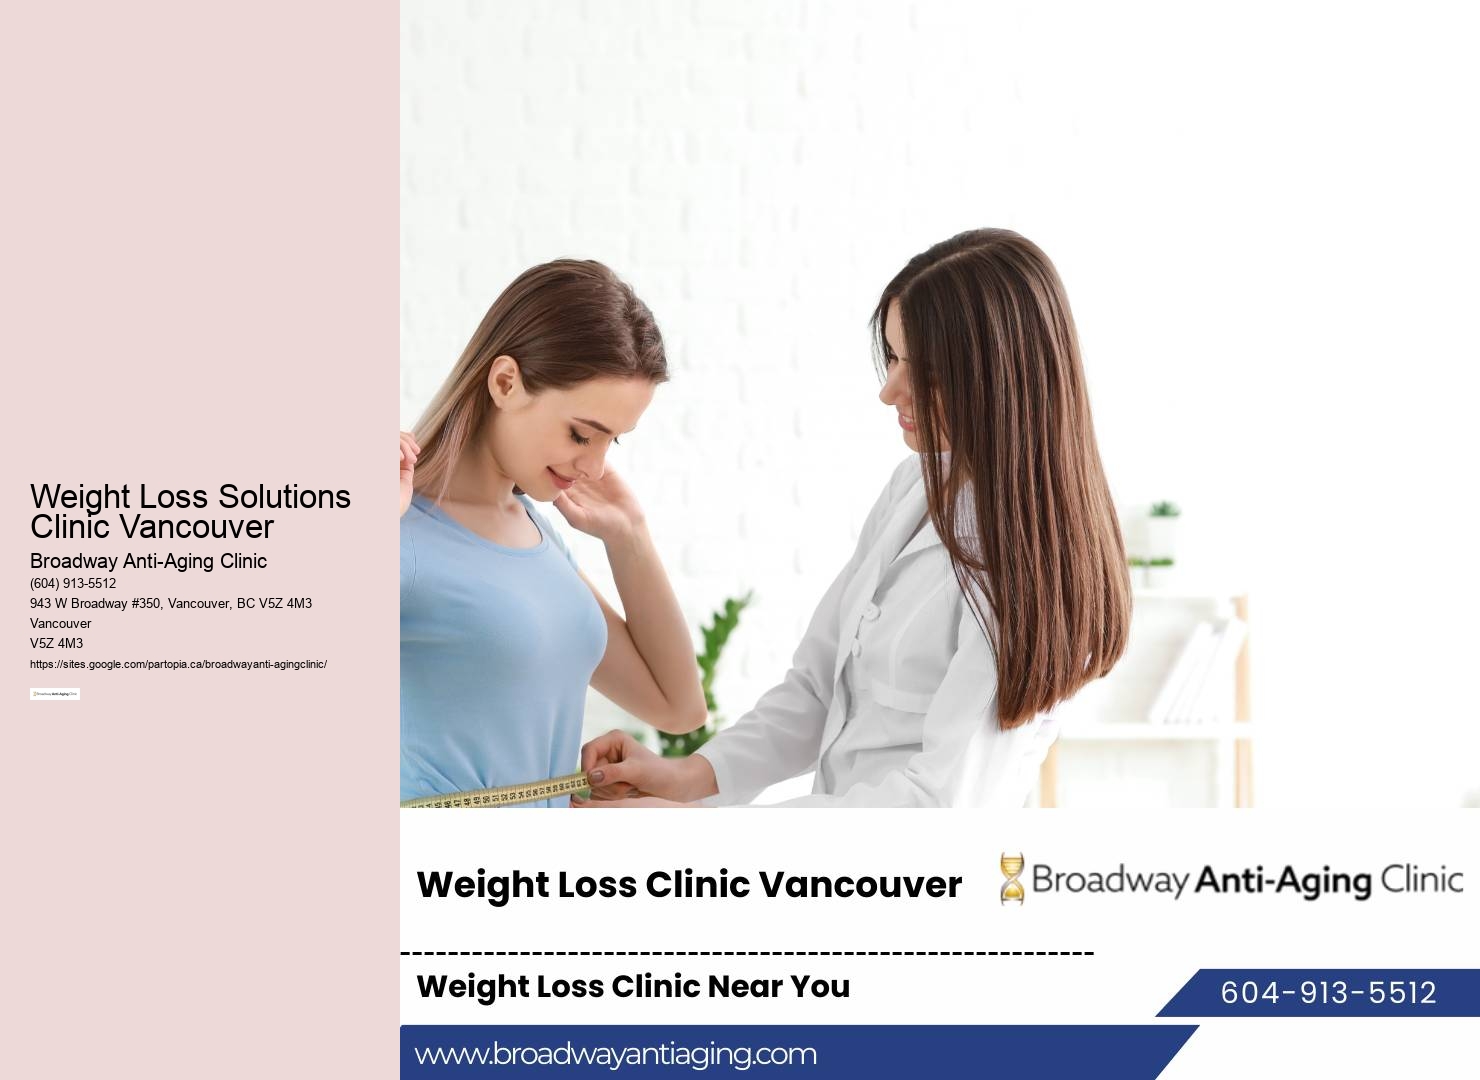 Weight Loss Solutions Clinic Vancouver